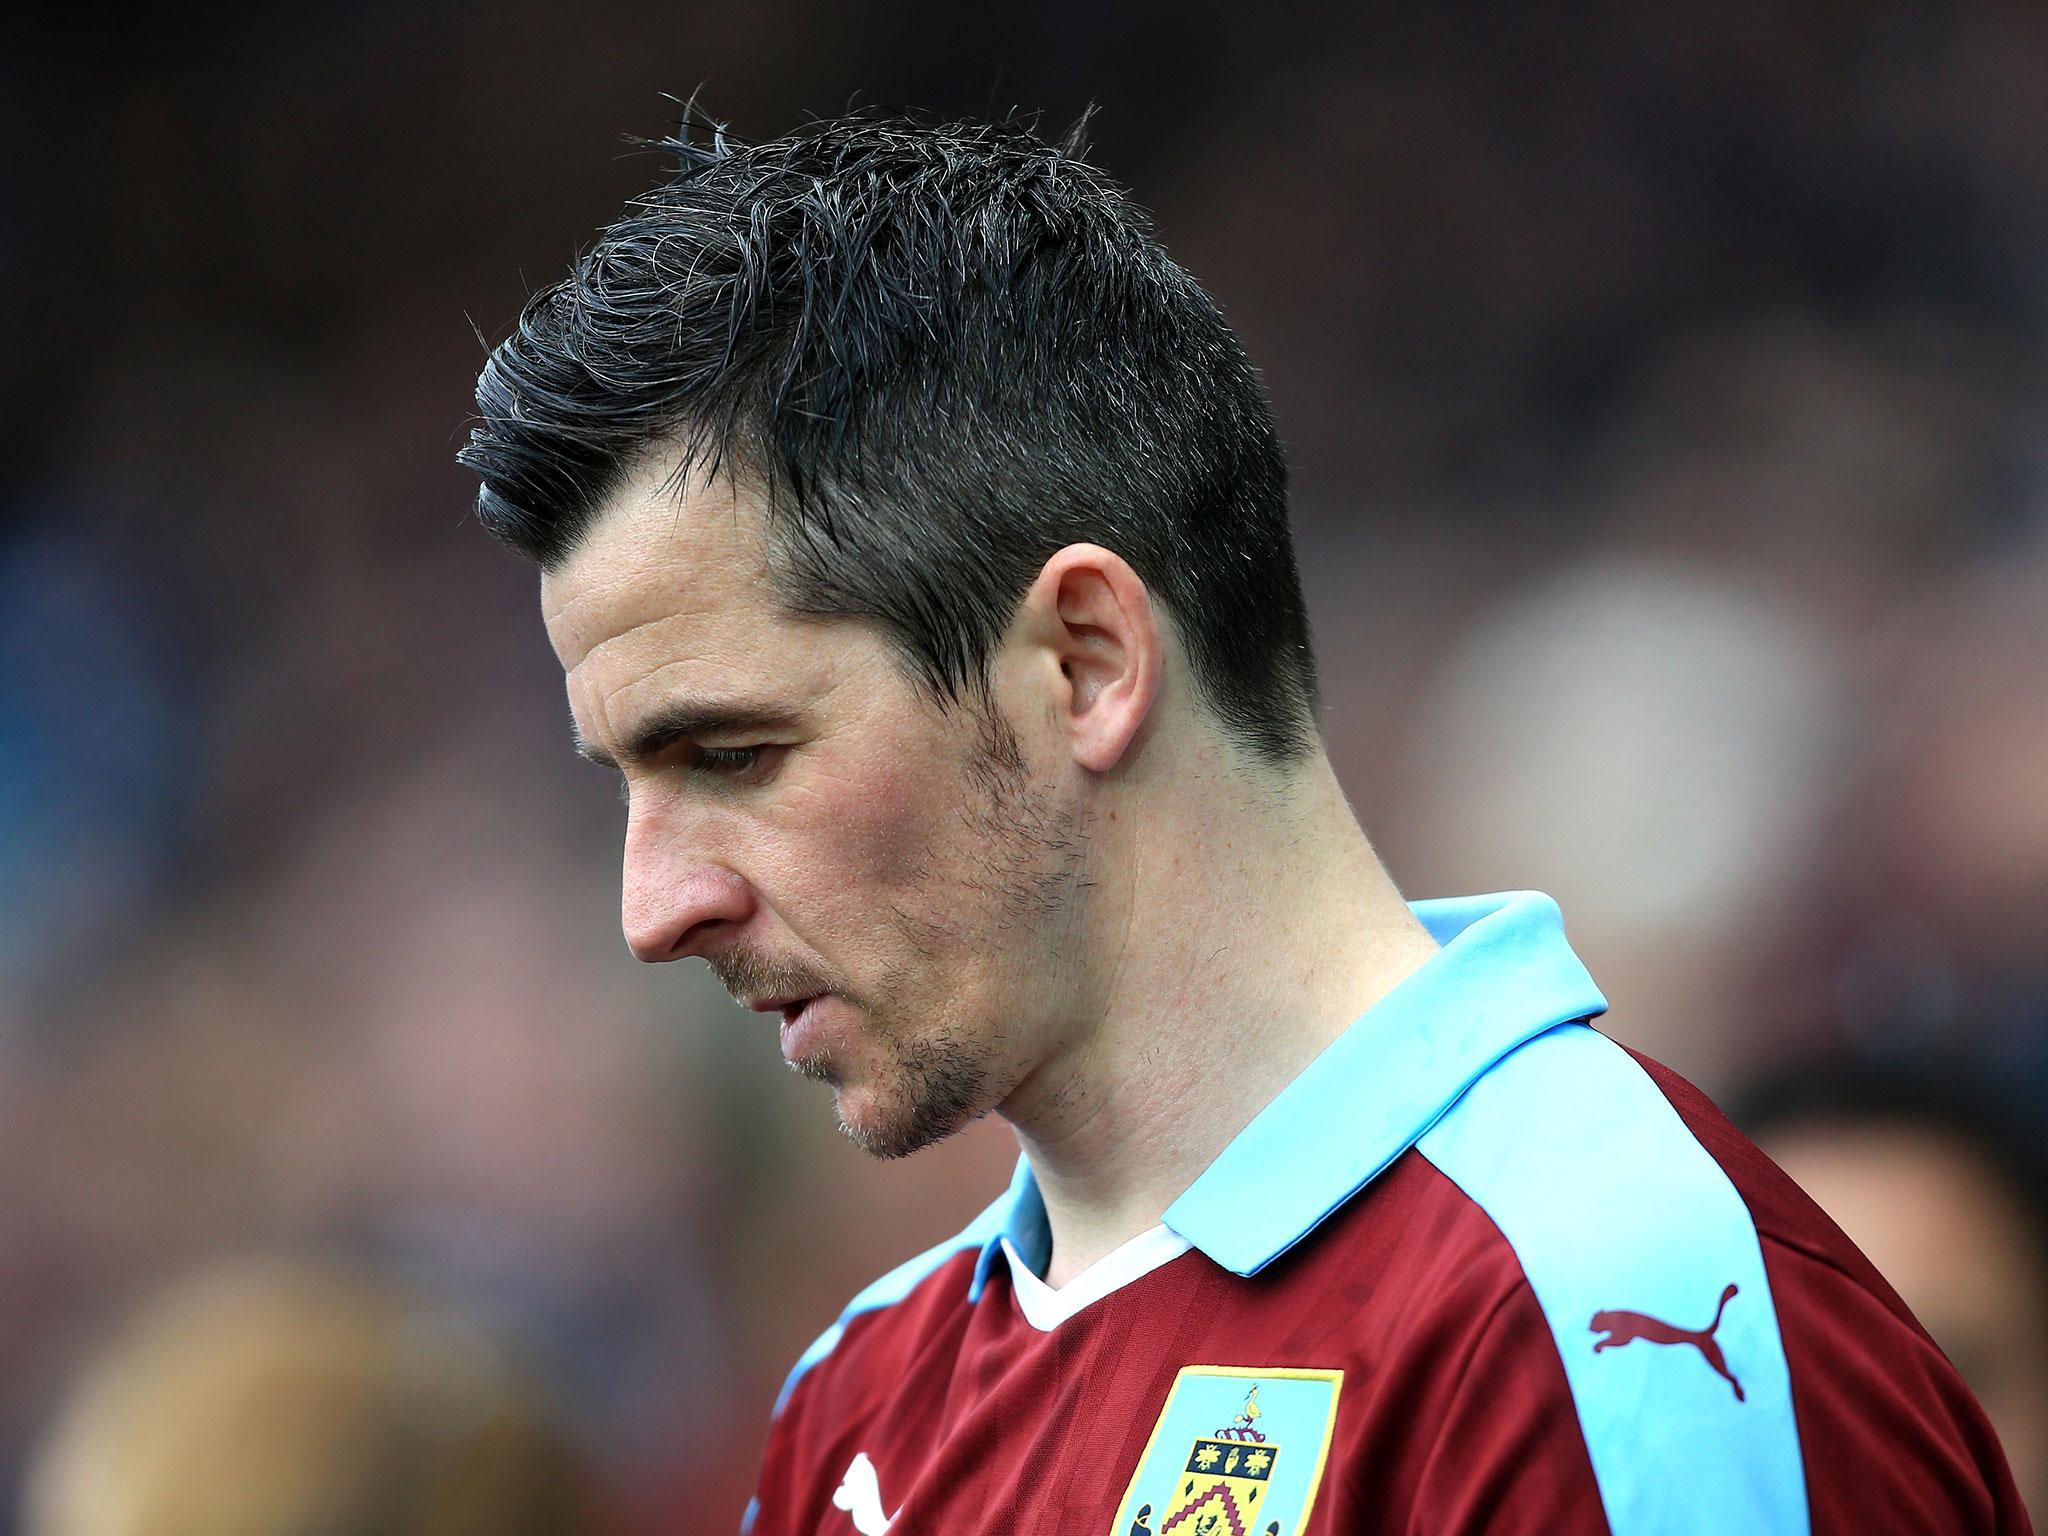 &#13;
Barton has claimed betting is rife in the English game &#13;